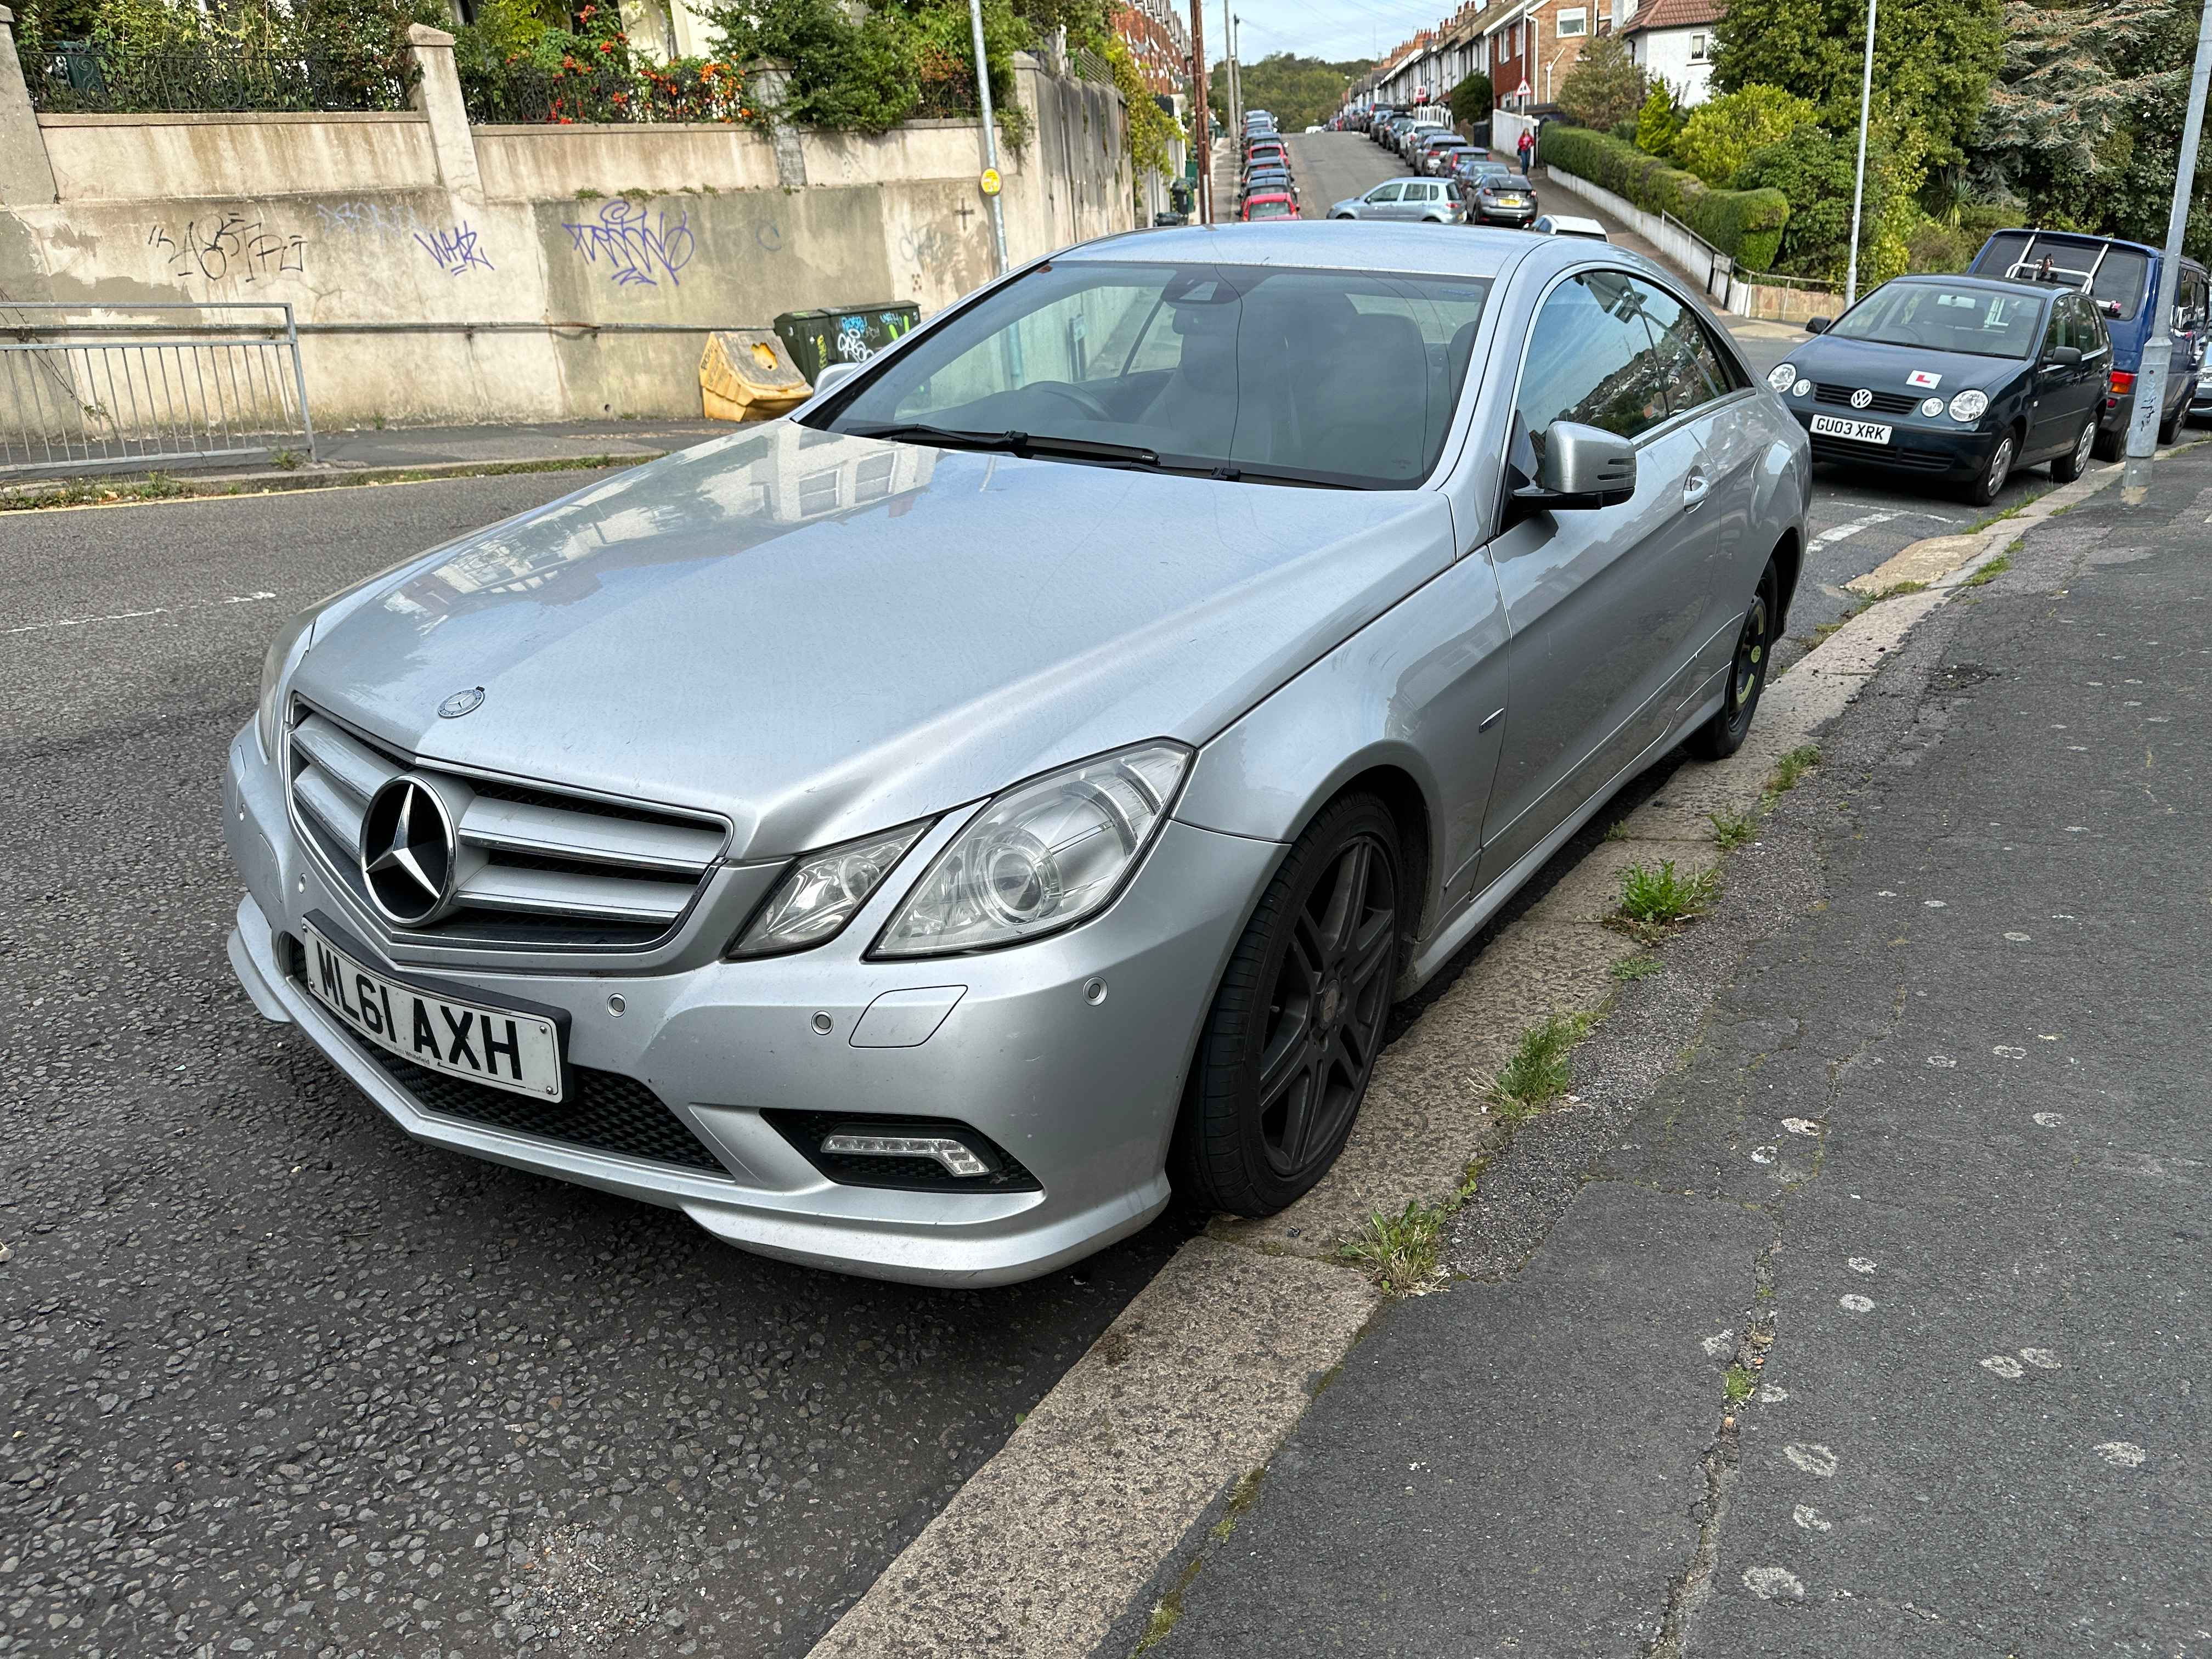 Photograph of ML61 AXH - a SIlver Mercedes E Class parked in Hollingdean by a non-resident, and potentially abandoned. The first of five photographs supplied by the residents of Hollingdean.